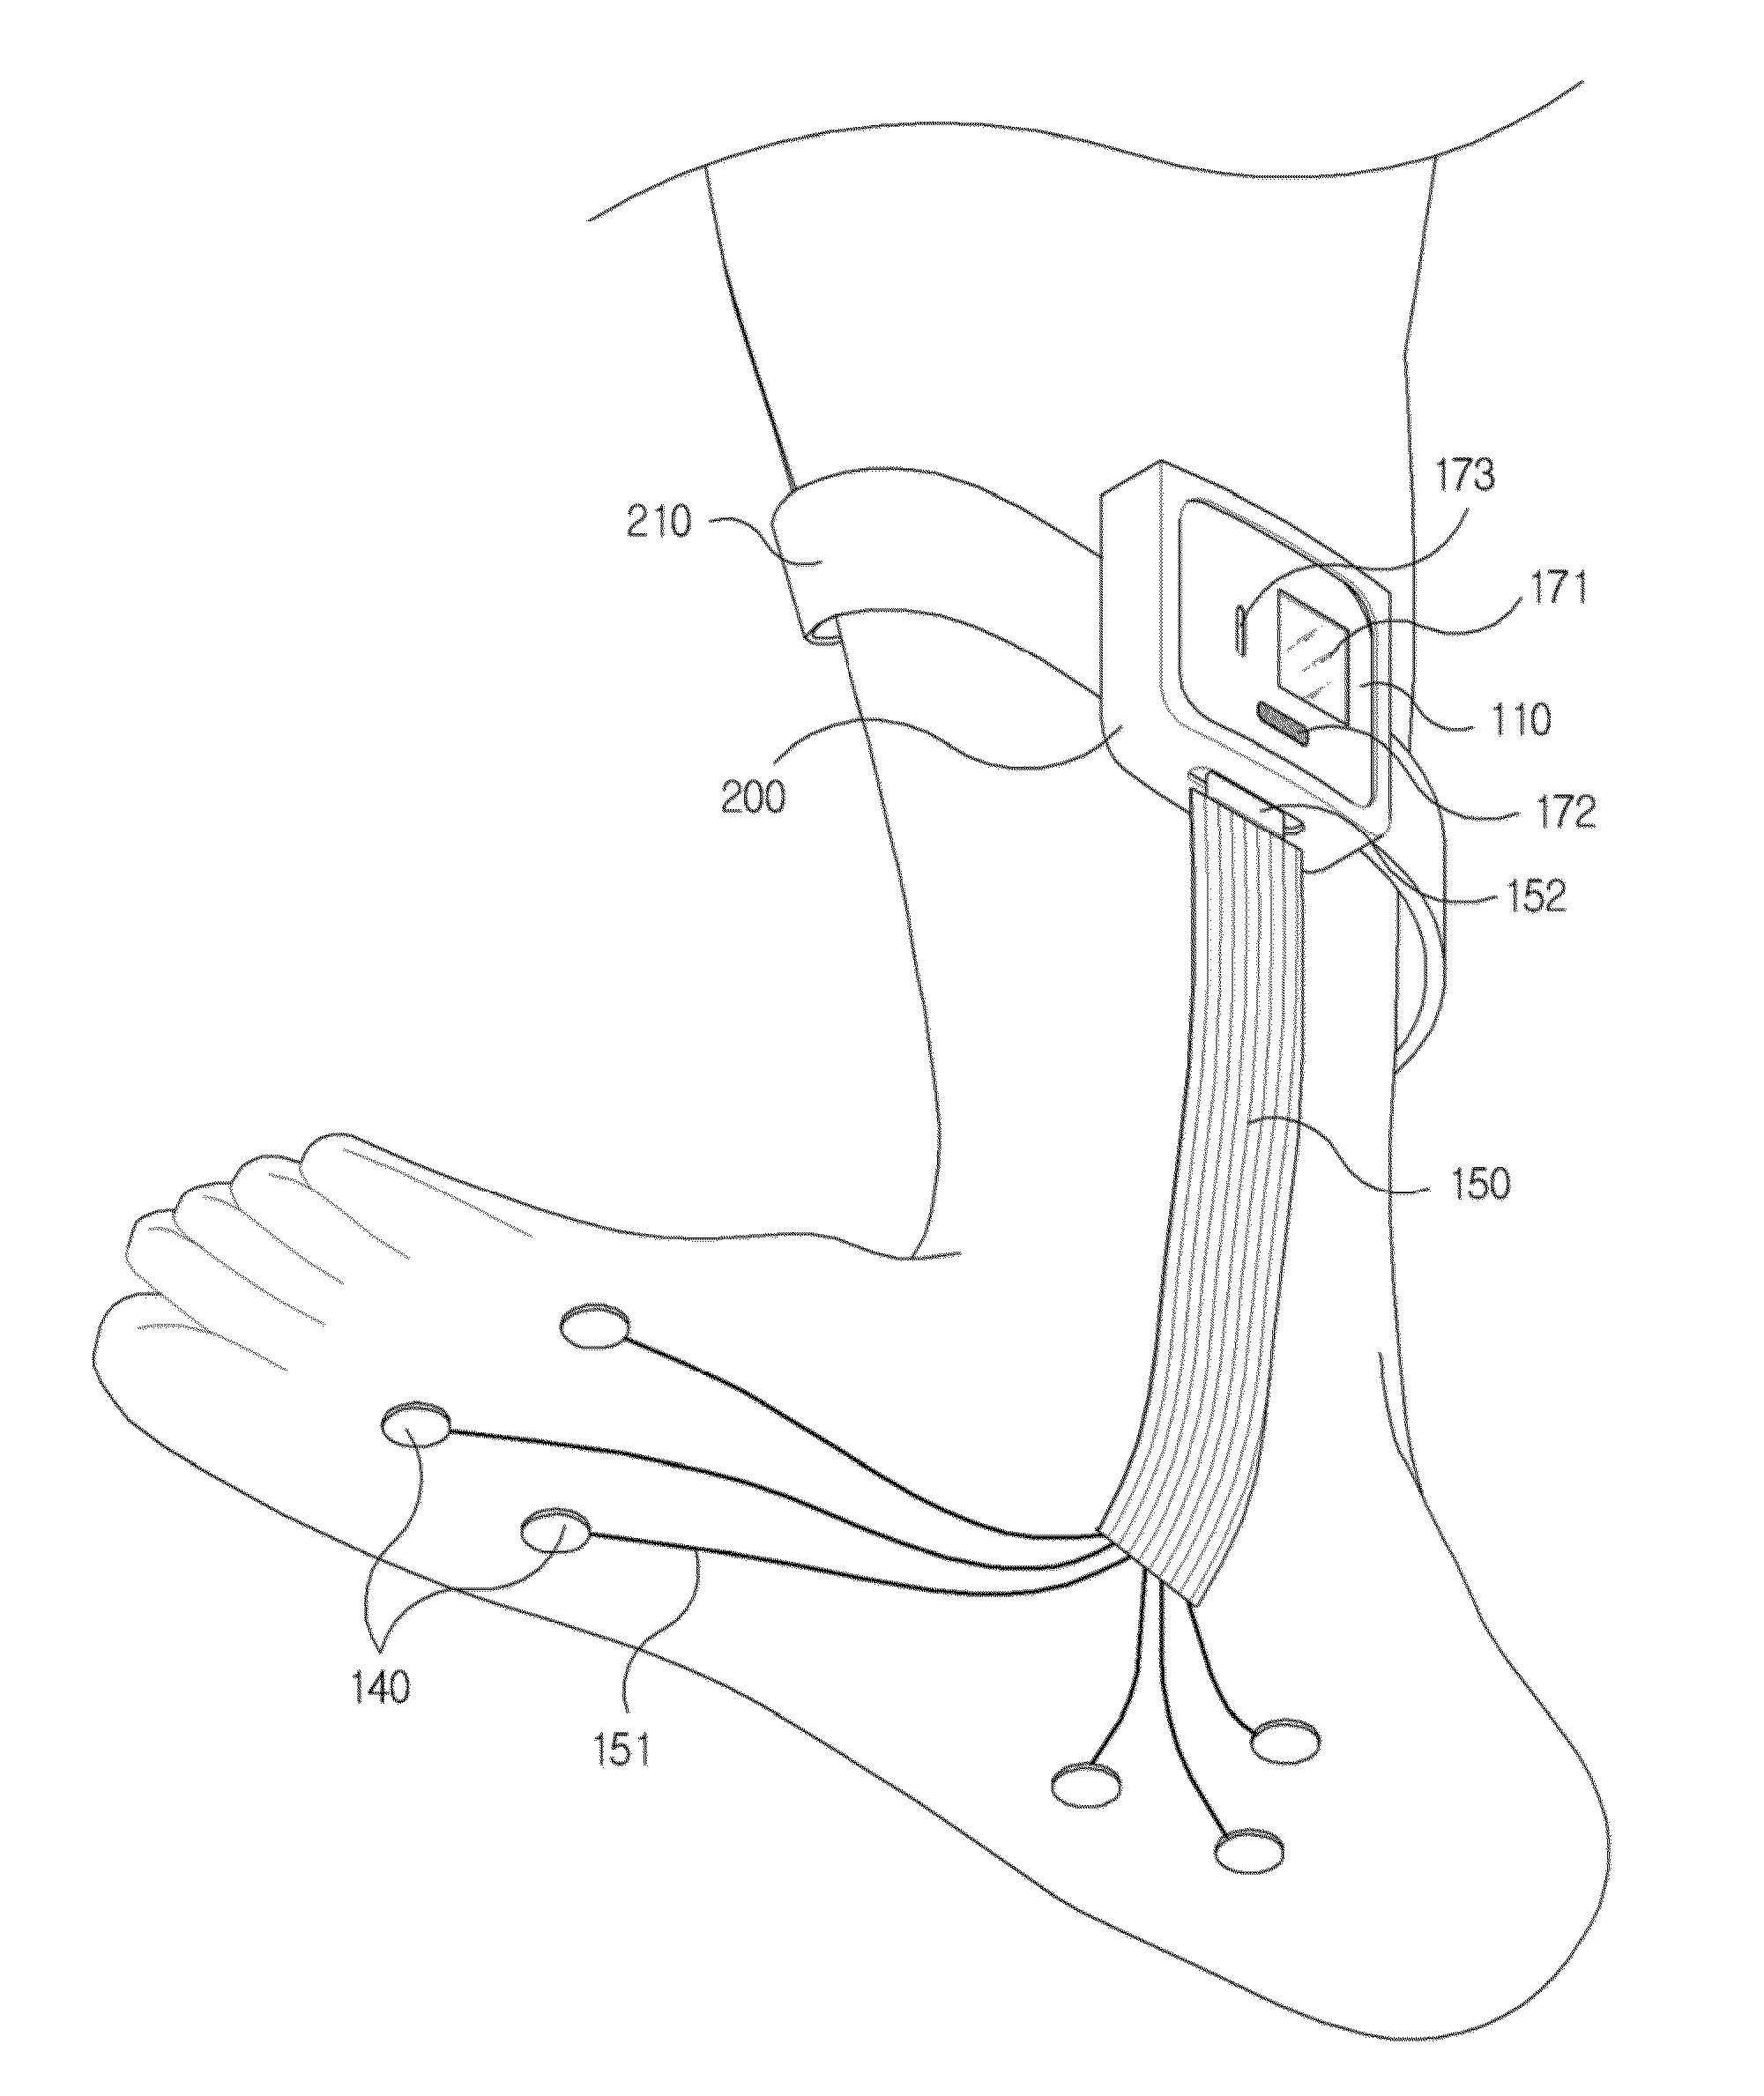 Therapy device for edema and neuropathy